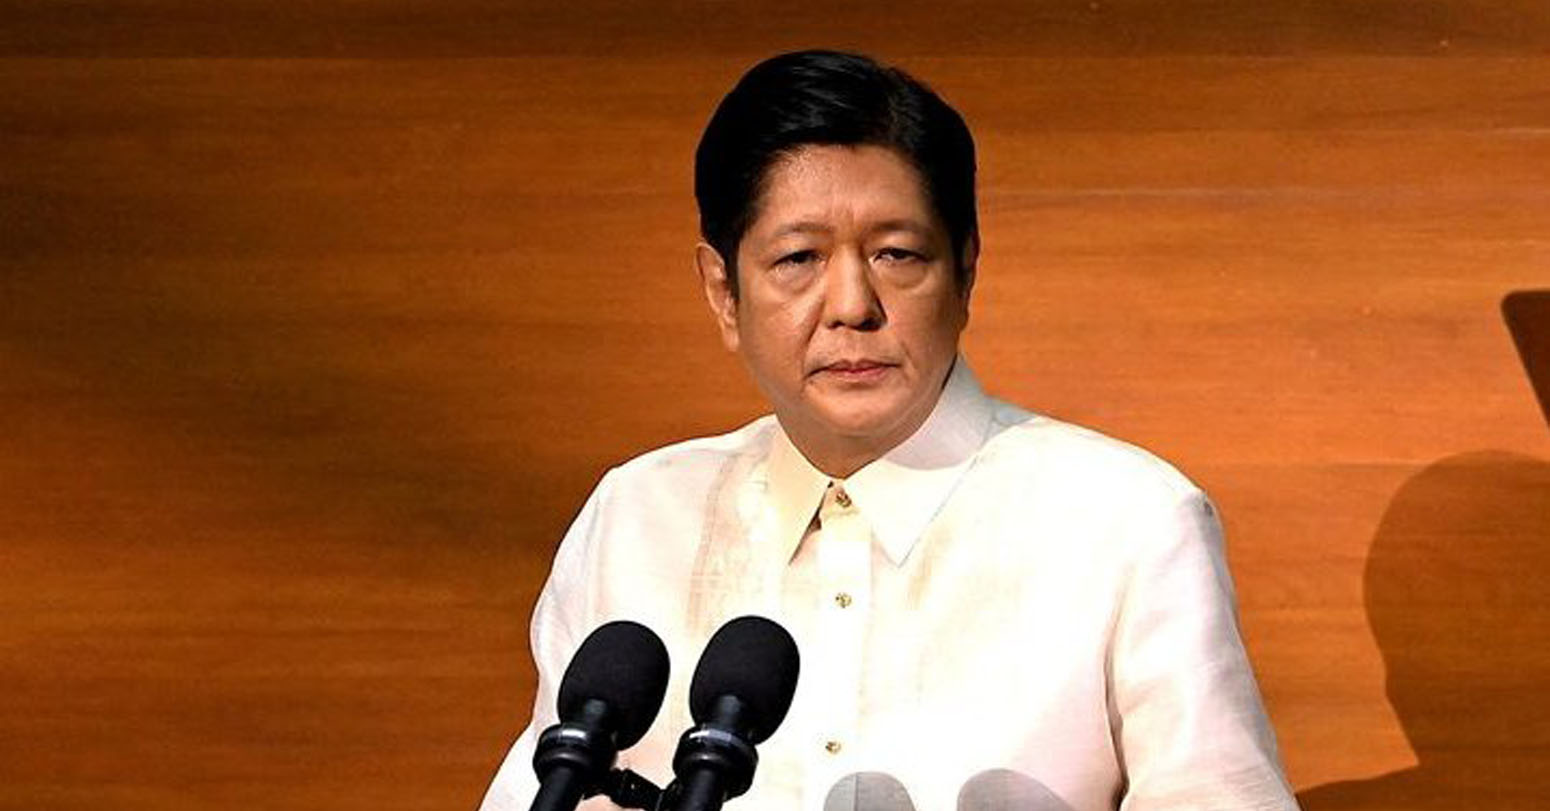 Philippine President Marcos Rules Out Giving US Access To More Military Bases